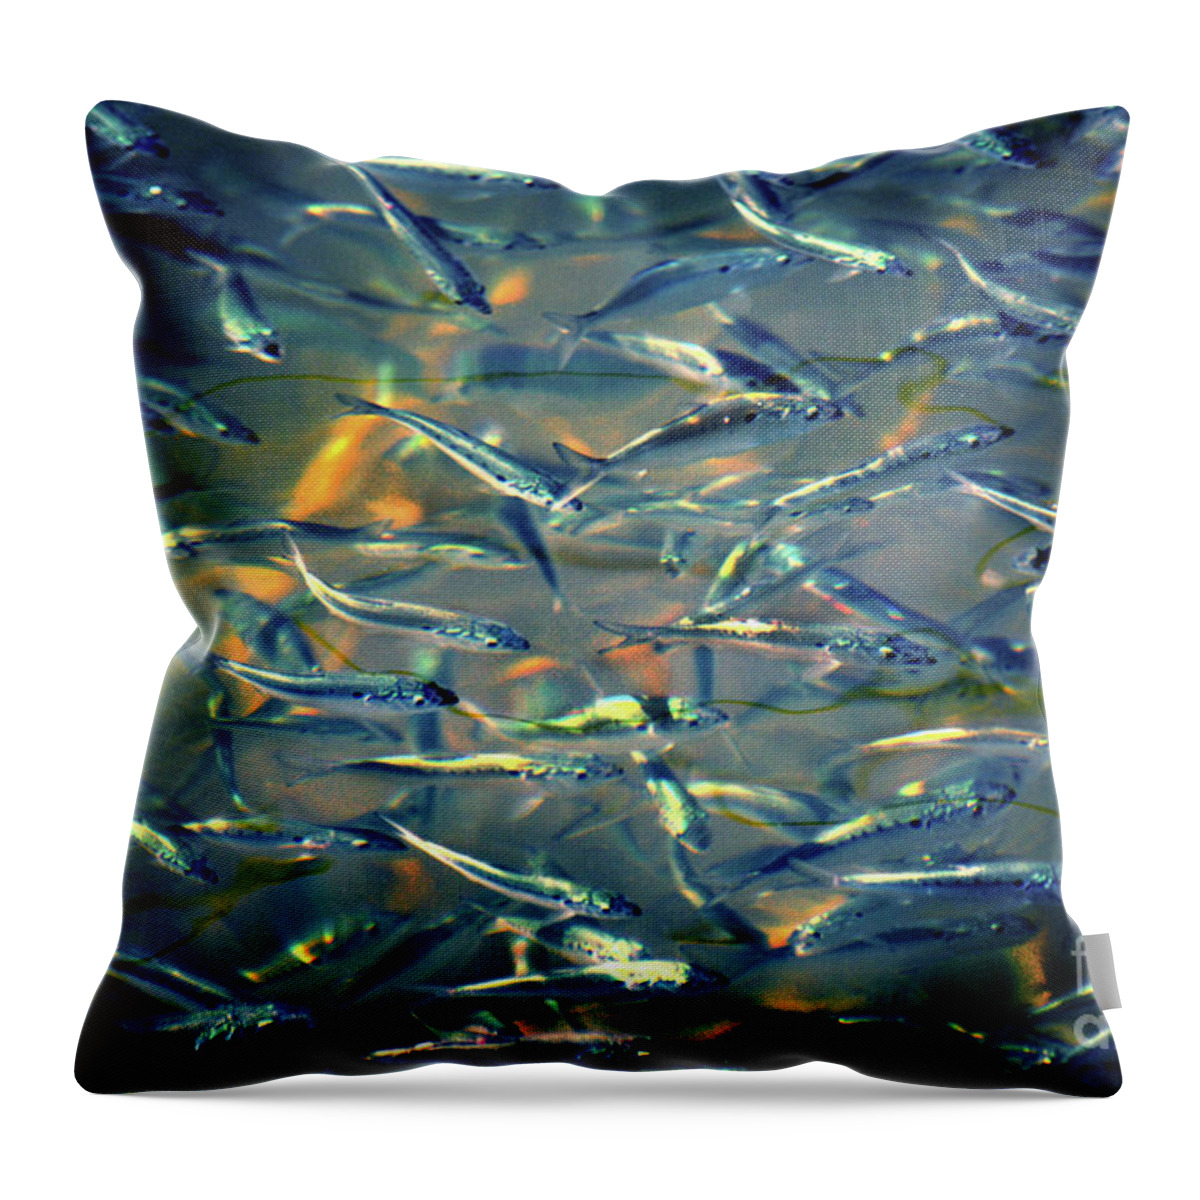 Minnows Throw Pillow featuring the photograph Minnows in Neon by Dianne Morgado